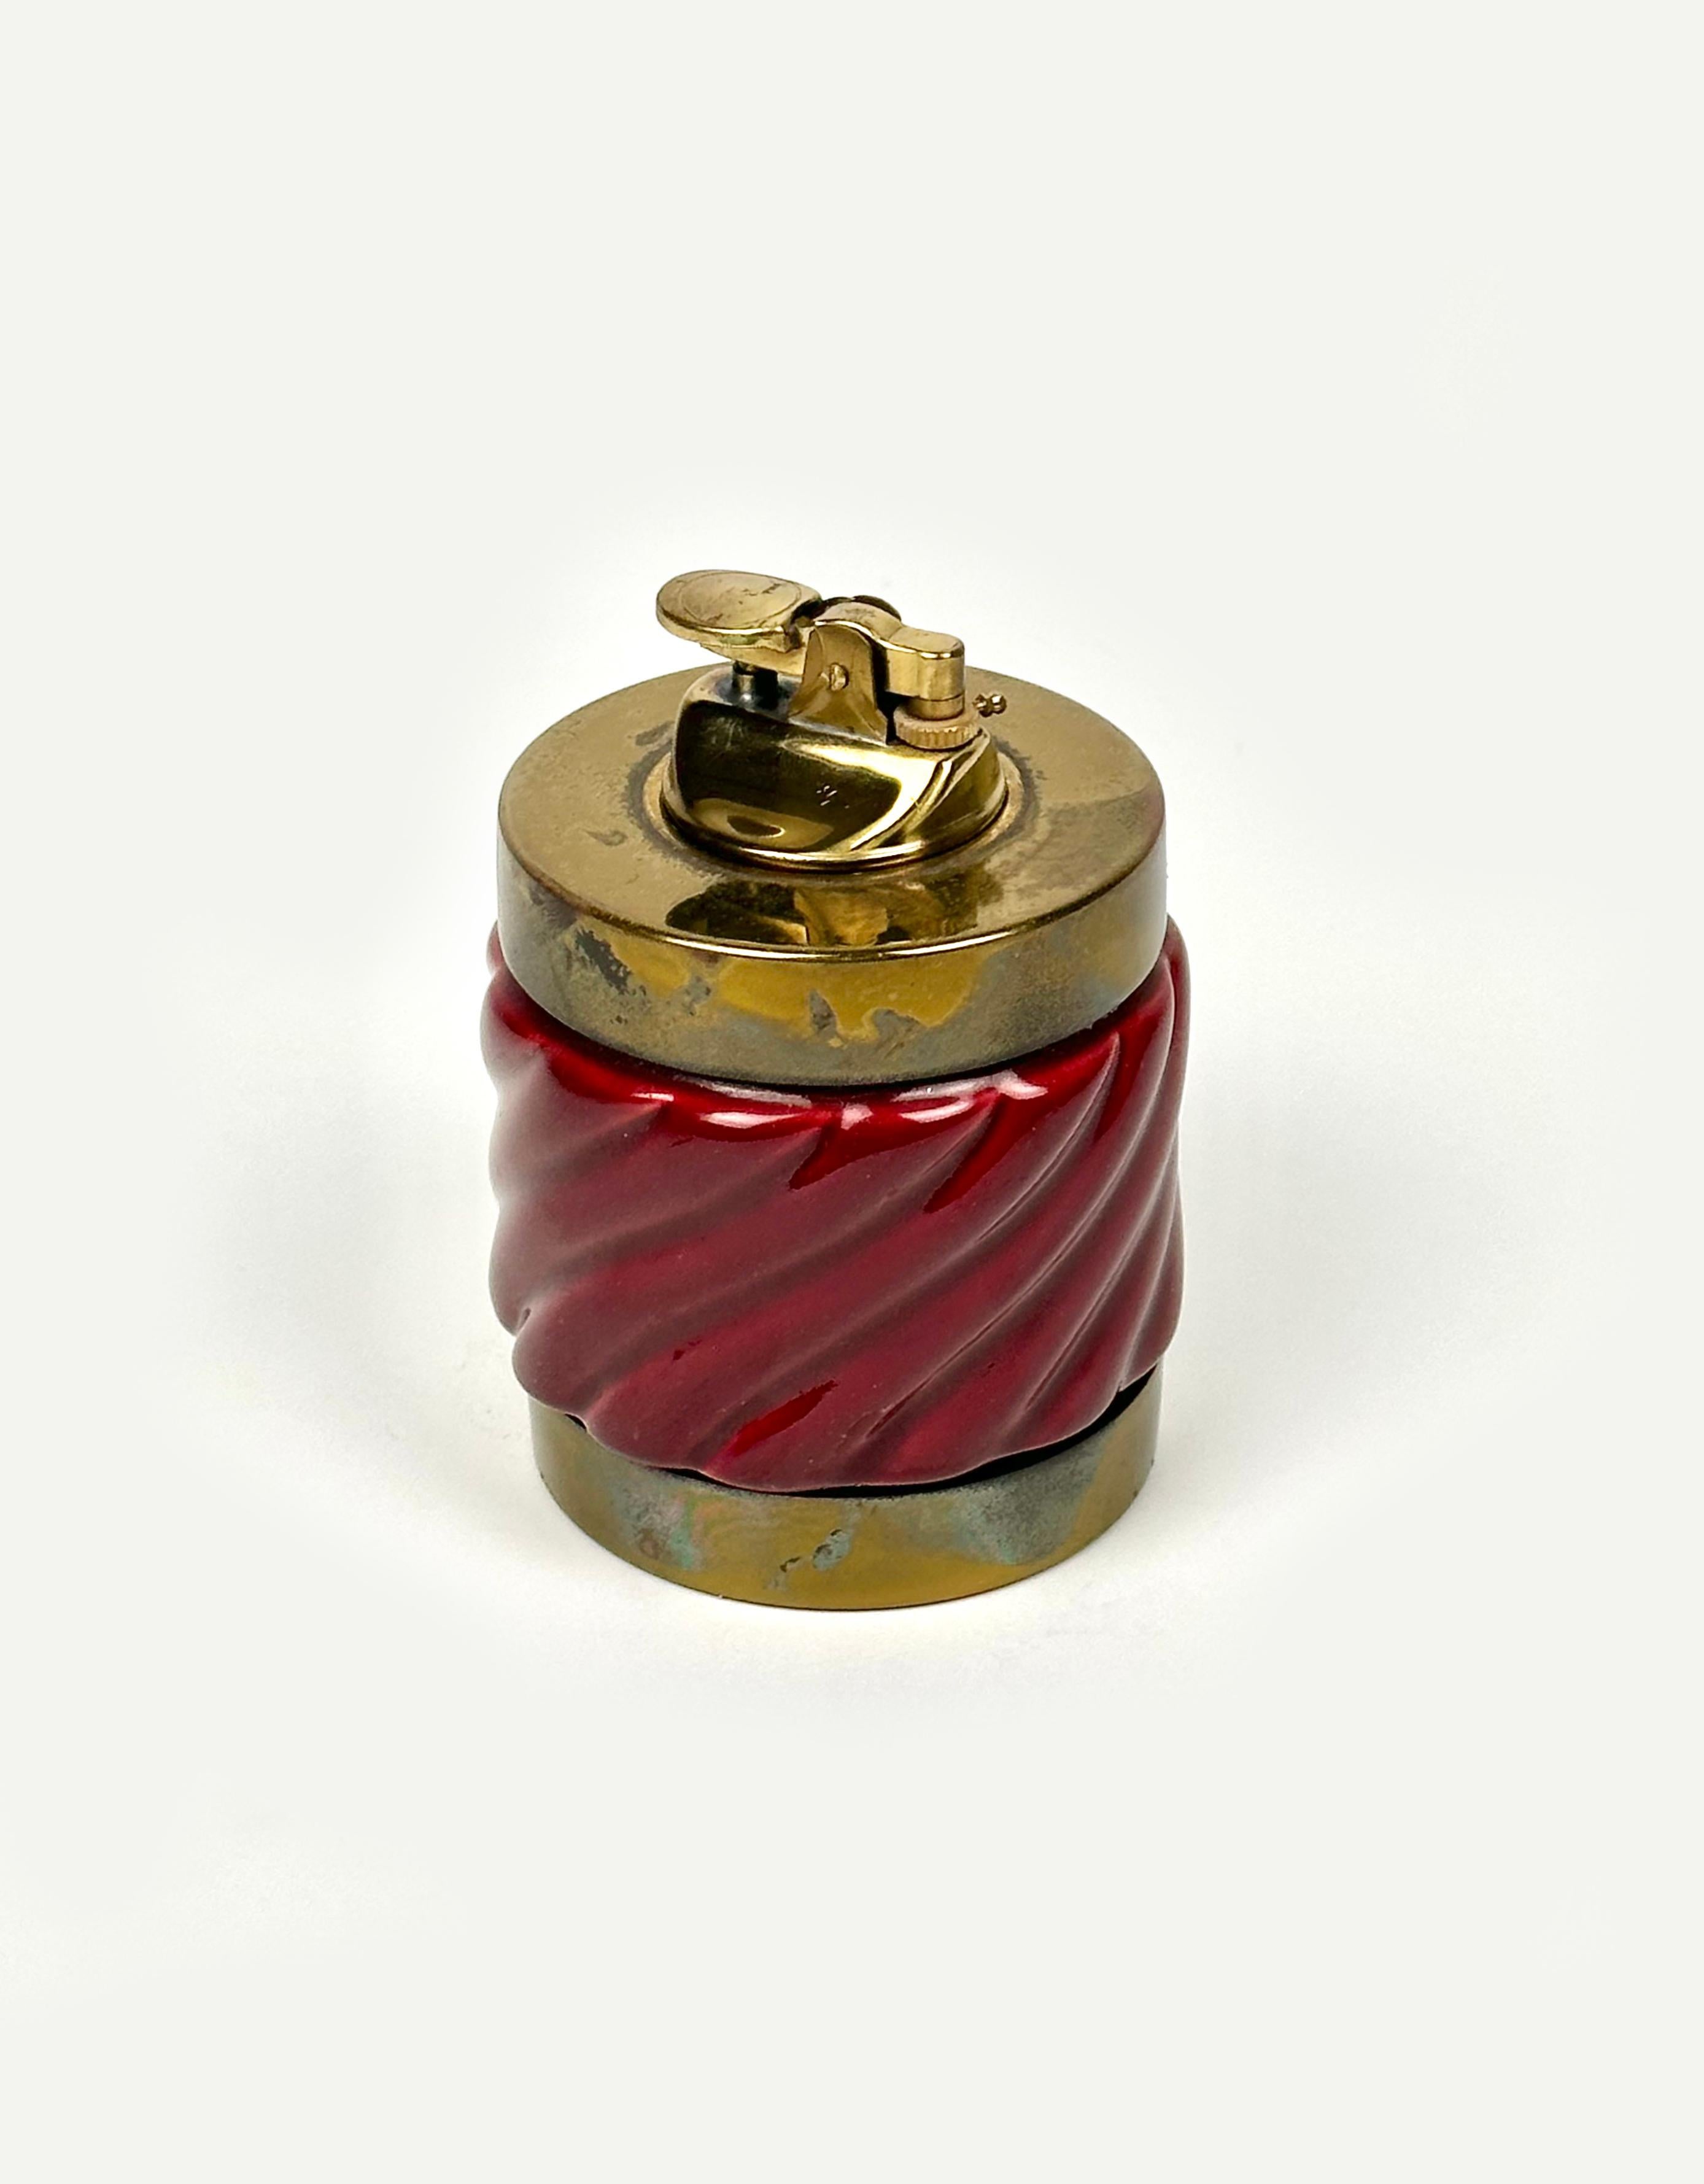 Table lighter in bordeaux ceramic and brass by the Italian designer Tommaso Barbi. 

Made in Italy in the 1970s. 

The lighter is functioning and Barbi's engraved initials are still visible on the bottom, as shown in the pictures.

Perfect